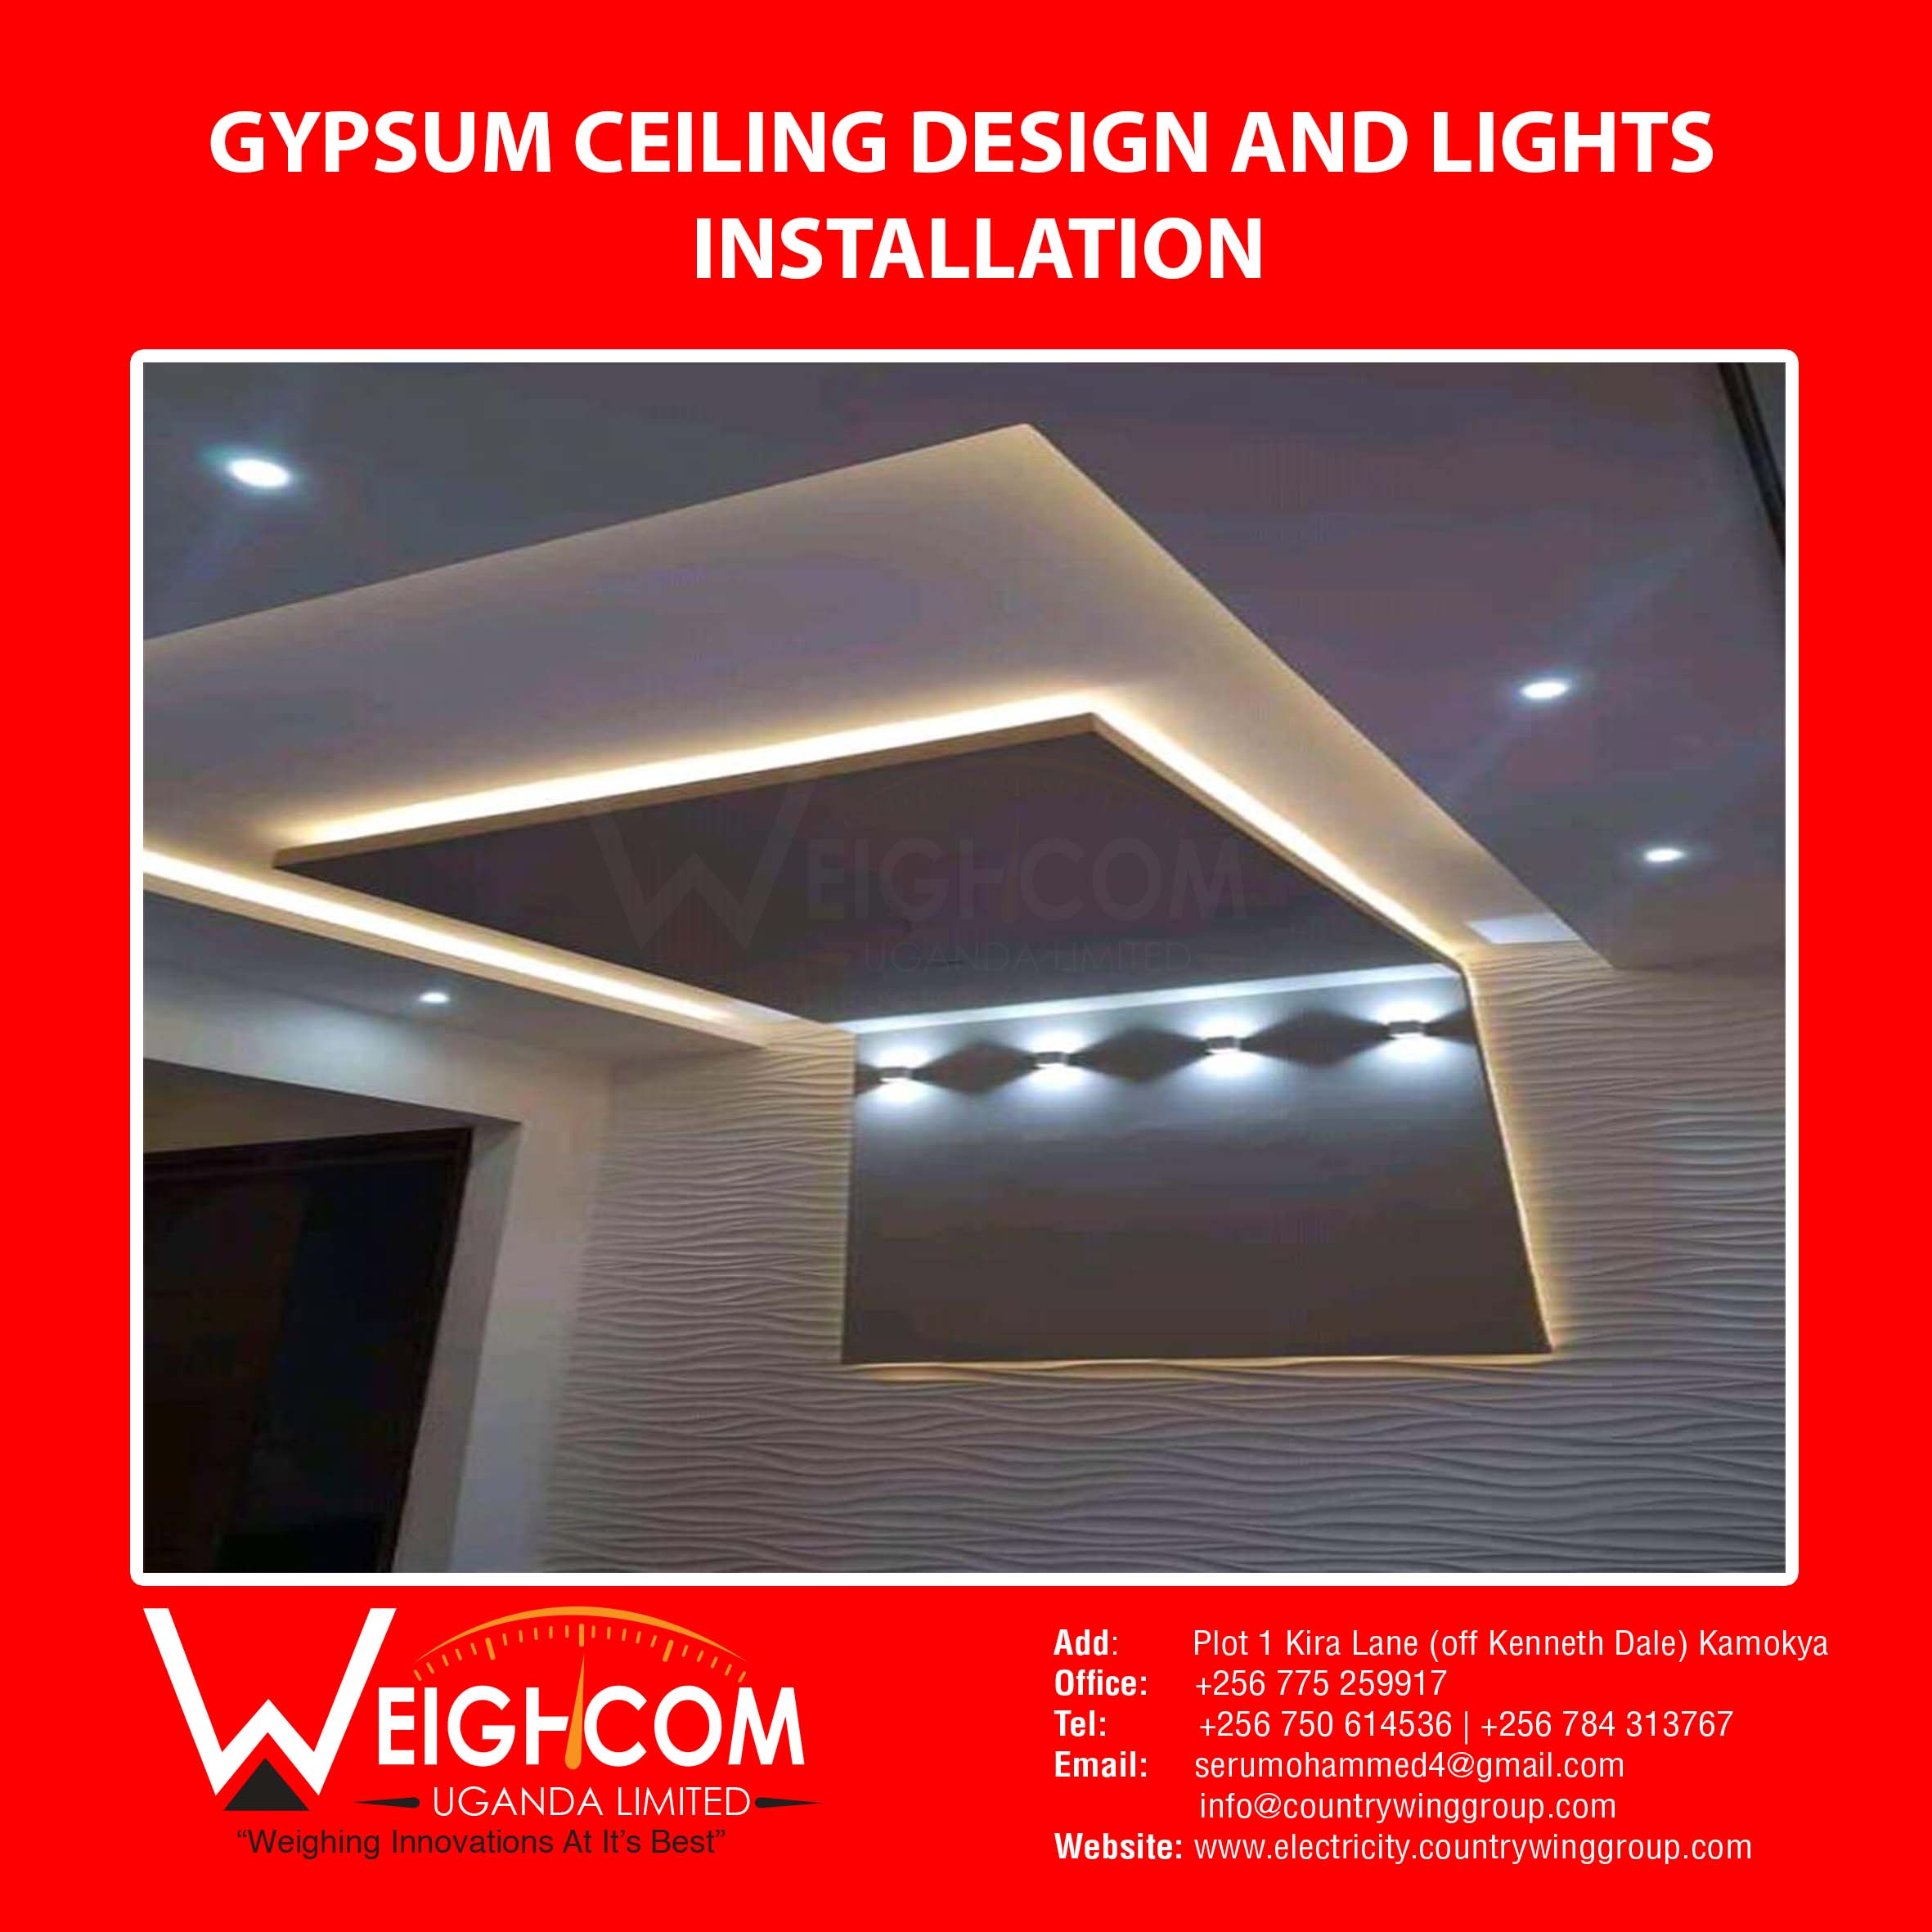 who designs gypsum ceilings in Kampala? we are here.